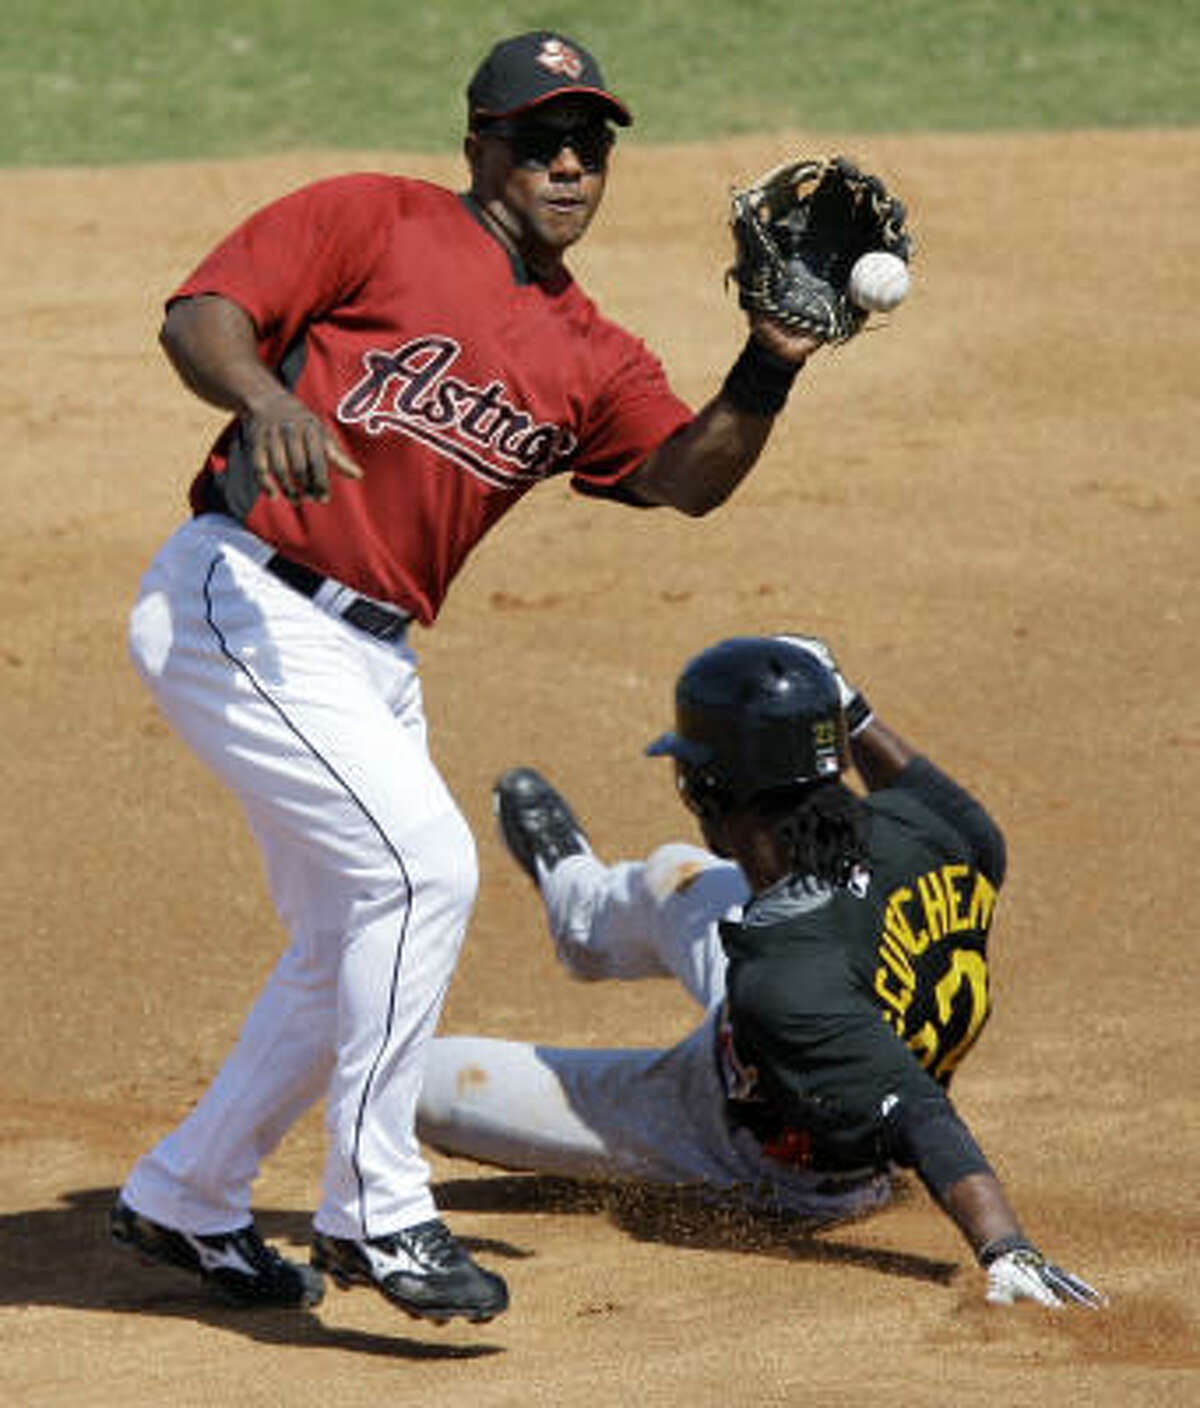 Astros shortstop Miguel Tejada, left, catches the throw from the catcher as Pittsburgh Pirates' Andrew McCutchen, right, steals second base.